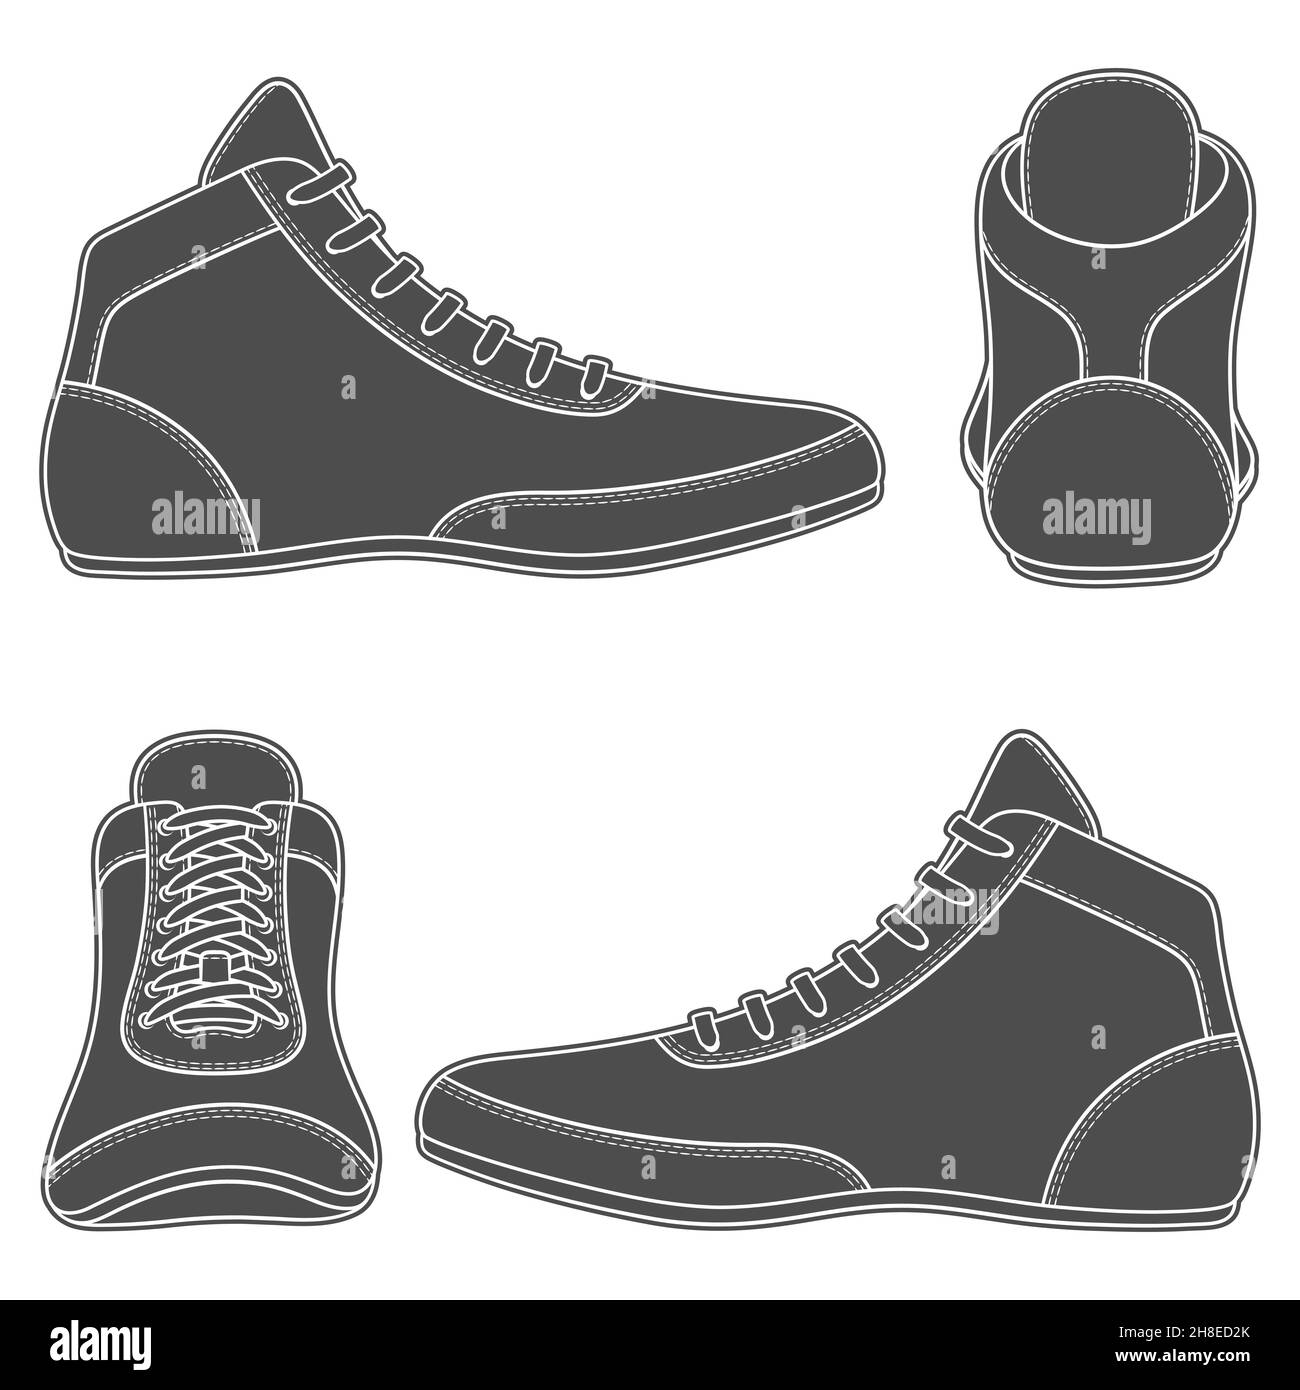 Set of black and white illustrations with wrestling shoes, sports shoes. Isolated vector objects on a white background. Stock Vector